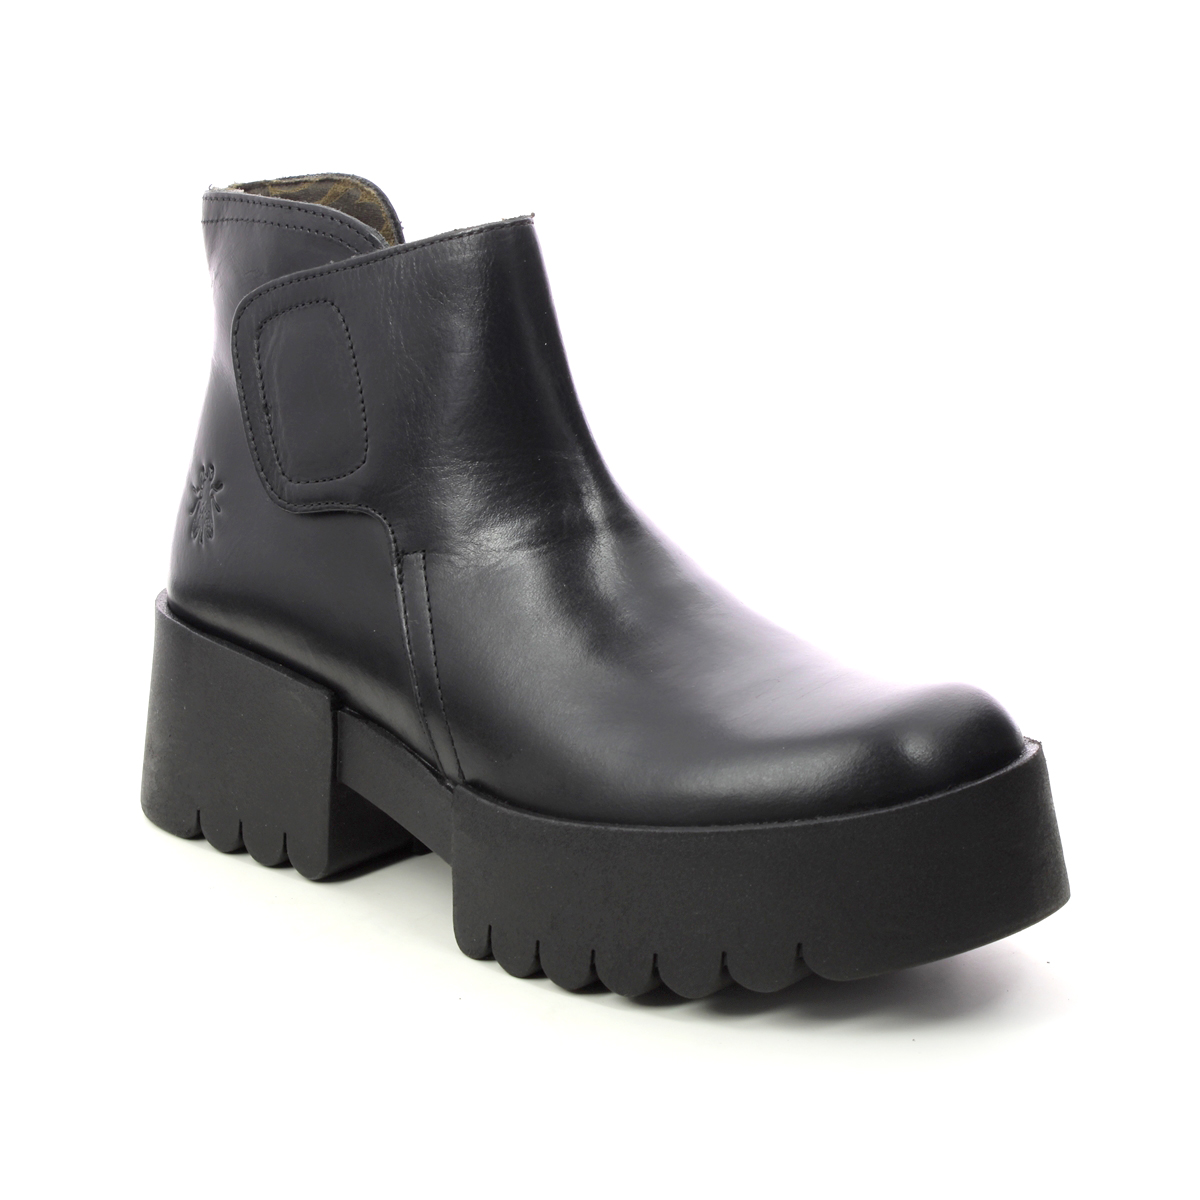 Fly London Endo   Esme Black Leather Womens Wedge Boots P145006 In Size 40 In Plain Black Leather